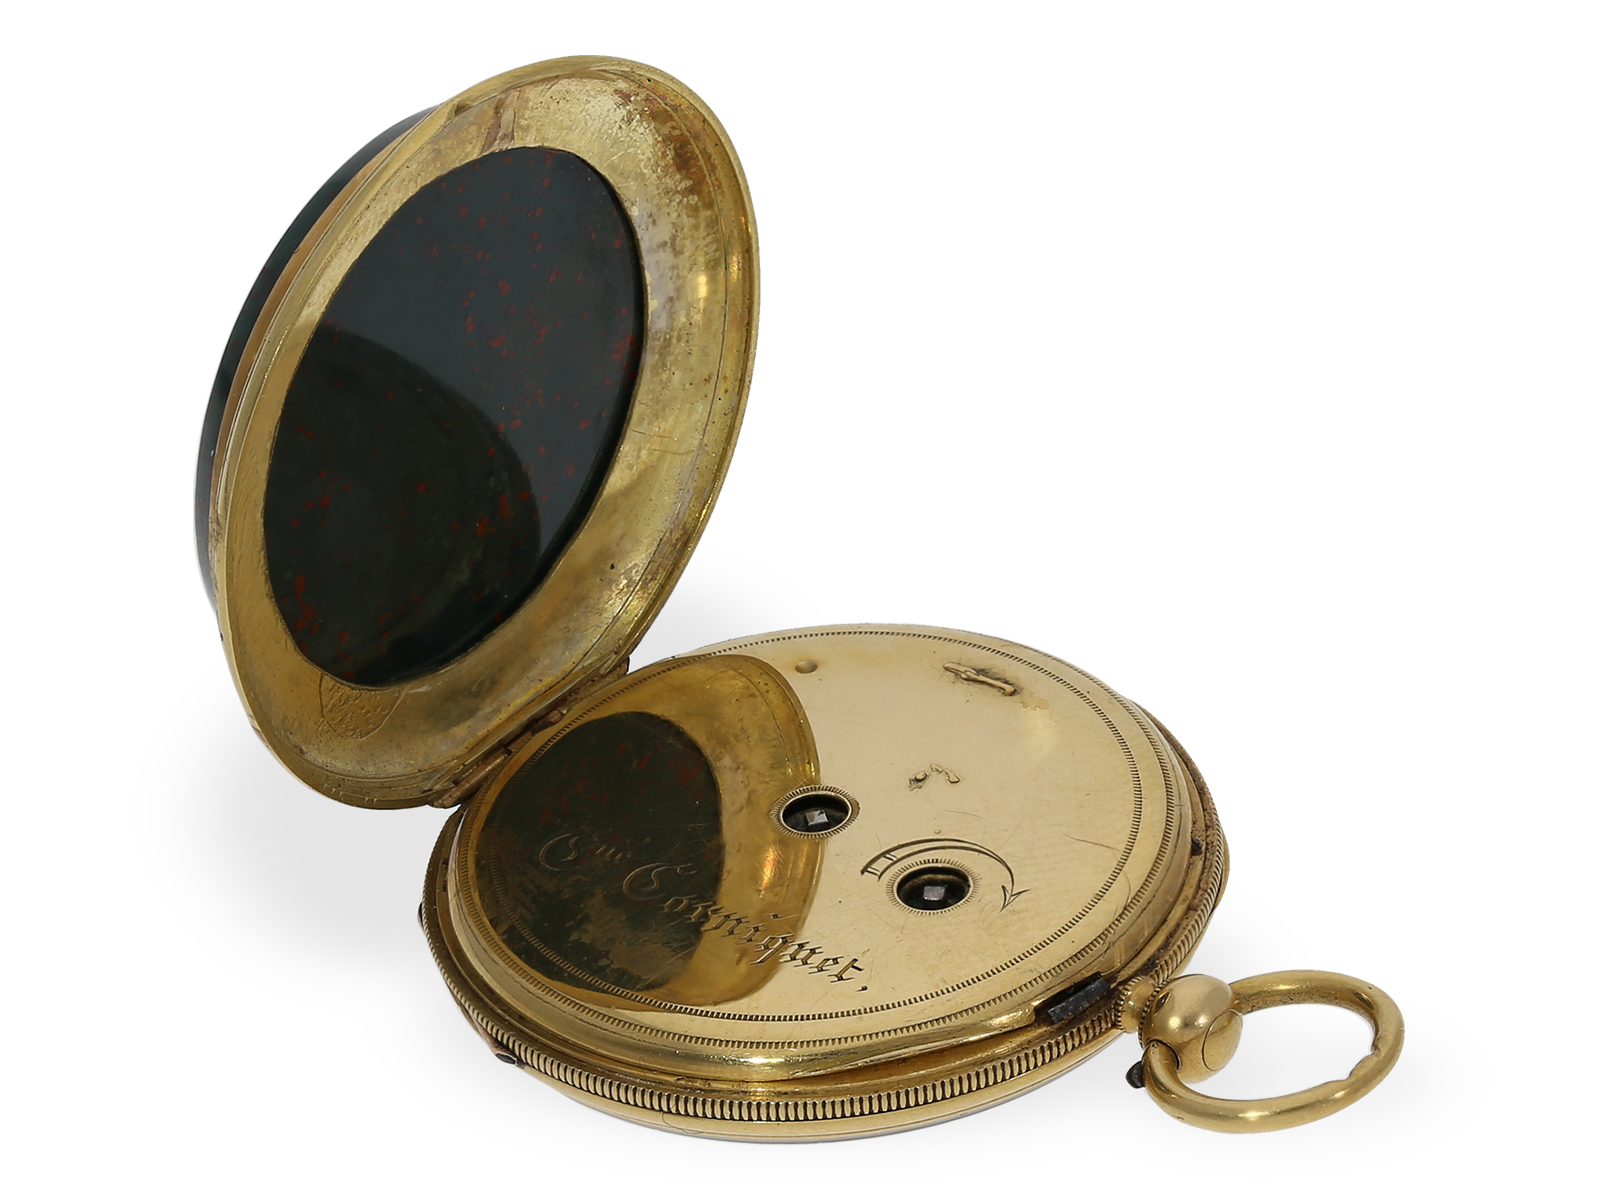 Pocket watch: rare lepine with gold/jasper case and gold/jasper chatelaine, ca. 1850 - Image 8 of 8